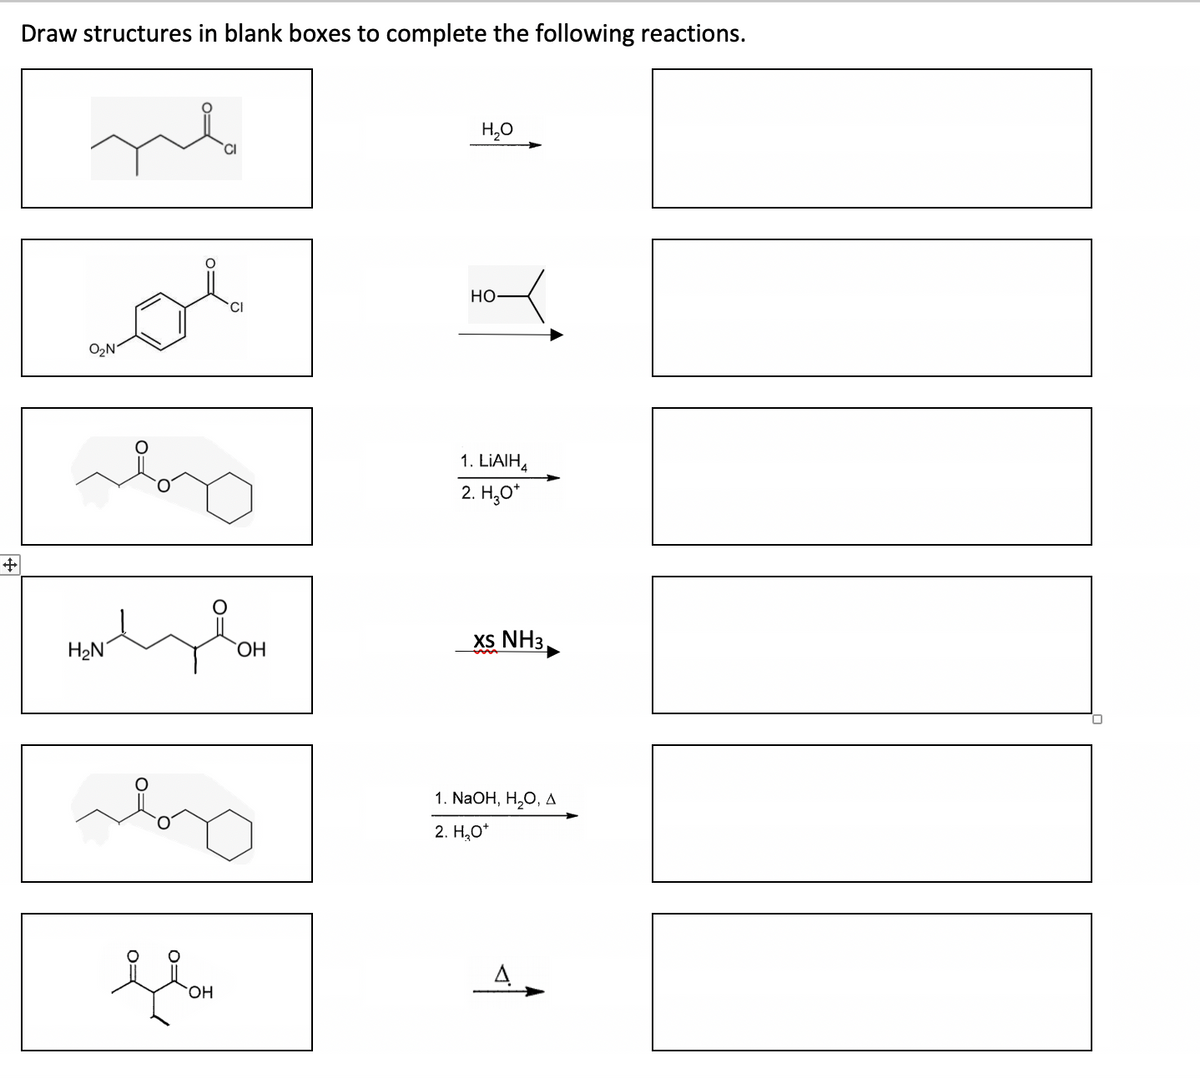 Draw structures in blank boxes to complete the following reactions.
mb
O₂N
by
HNLICH
H₂N
CI
flou
OH
OH
y
H₂O
HO
1. LIAIH
2. H₂O*
XS NH3,
1. NaOH, H₂O, A
2. H₂O*